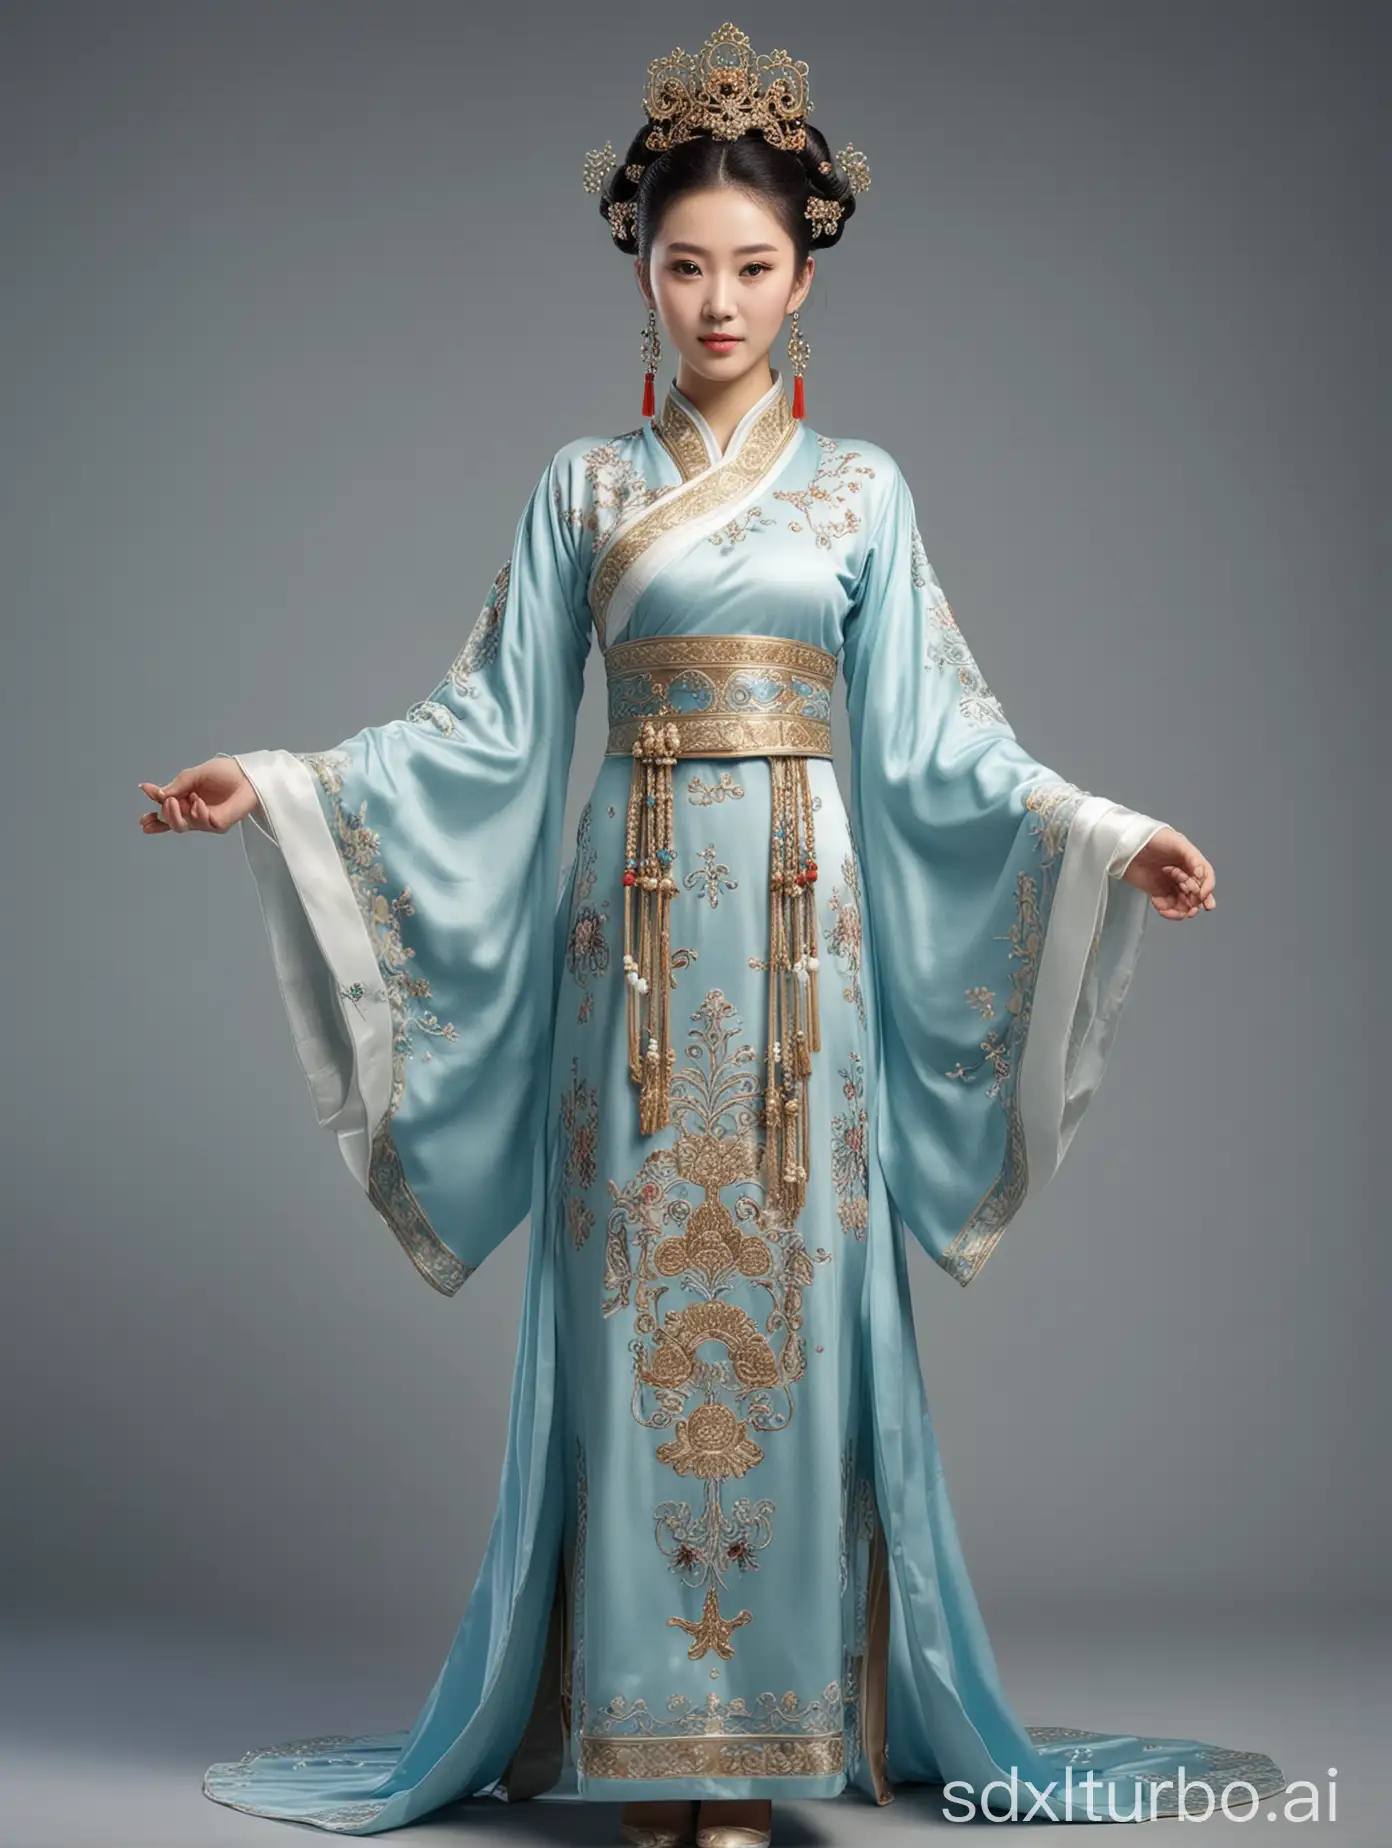 Elegant-Chinese-Woman-in-Traditional-Attire-Exquisite-FullLength-Portrait